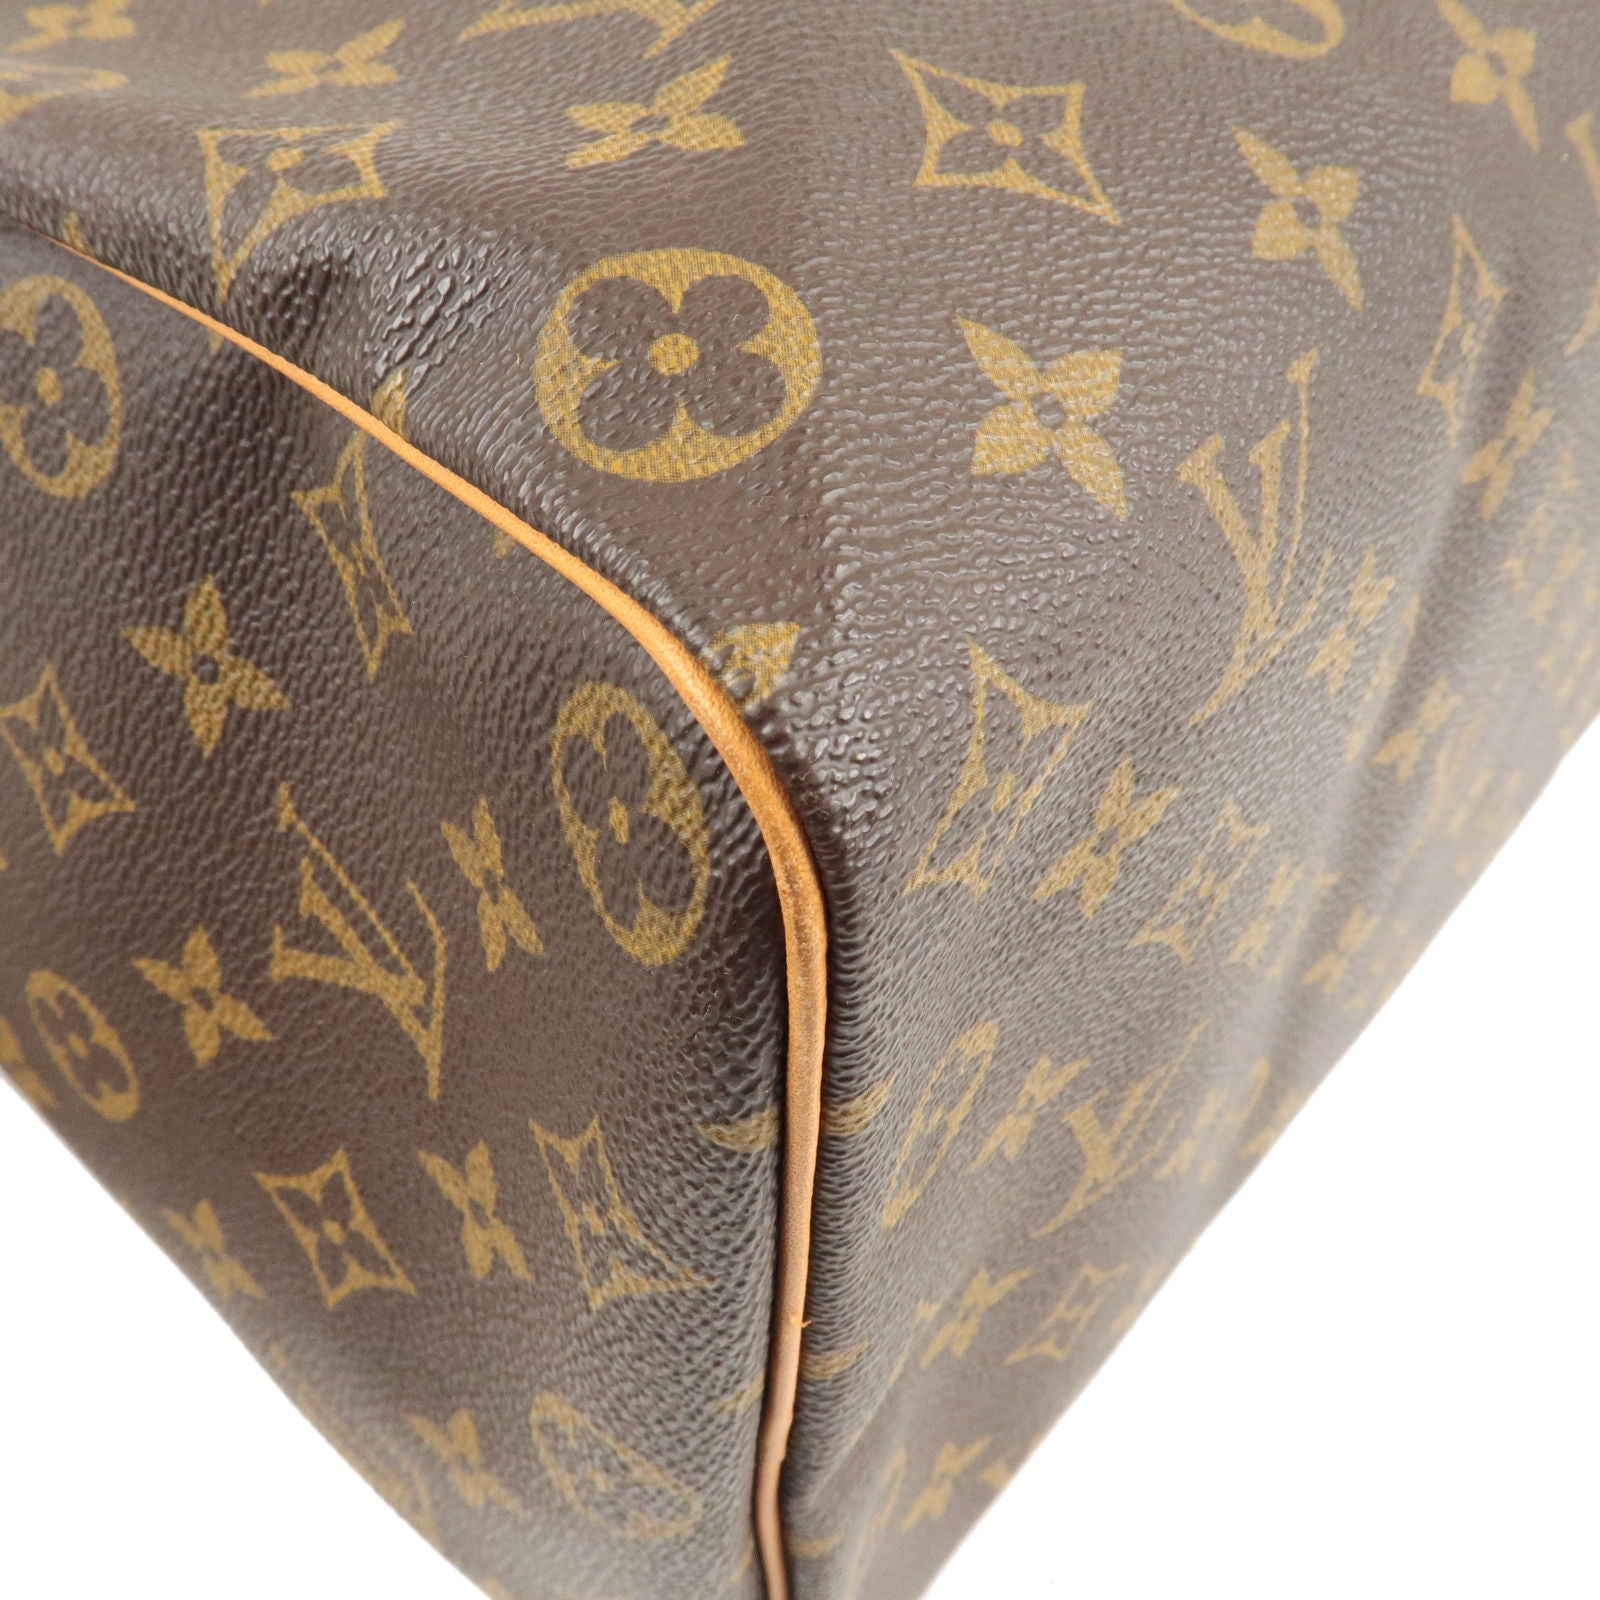 2019 Louis Vuitton Brown Monogram Canvas and Leather Soft Trunk Messenger MM